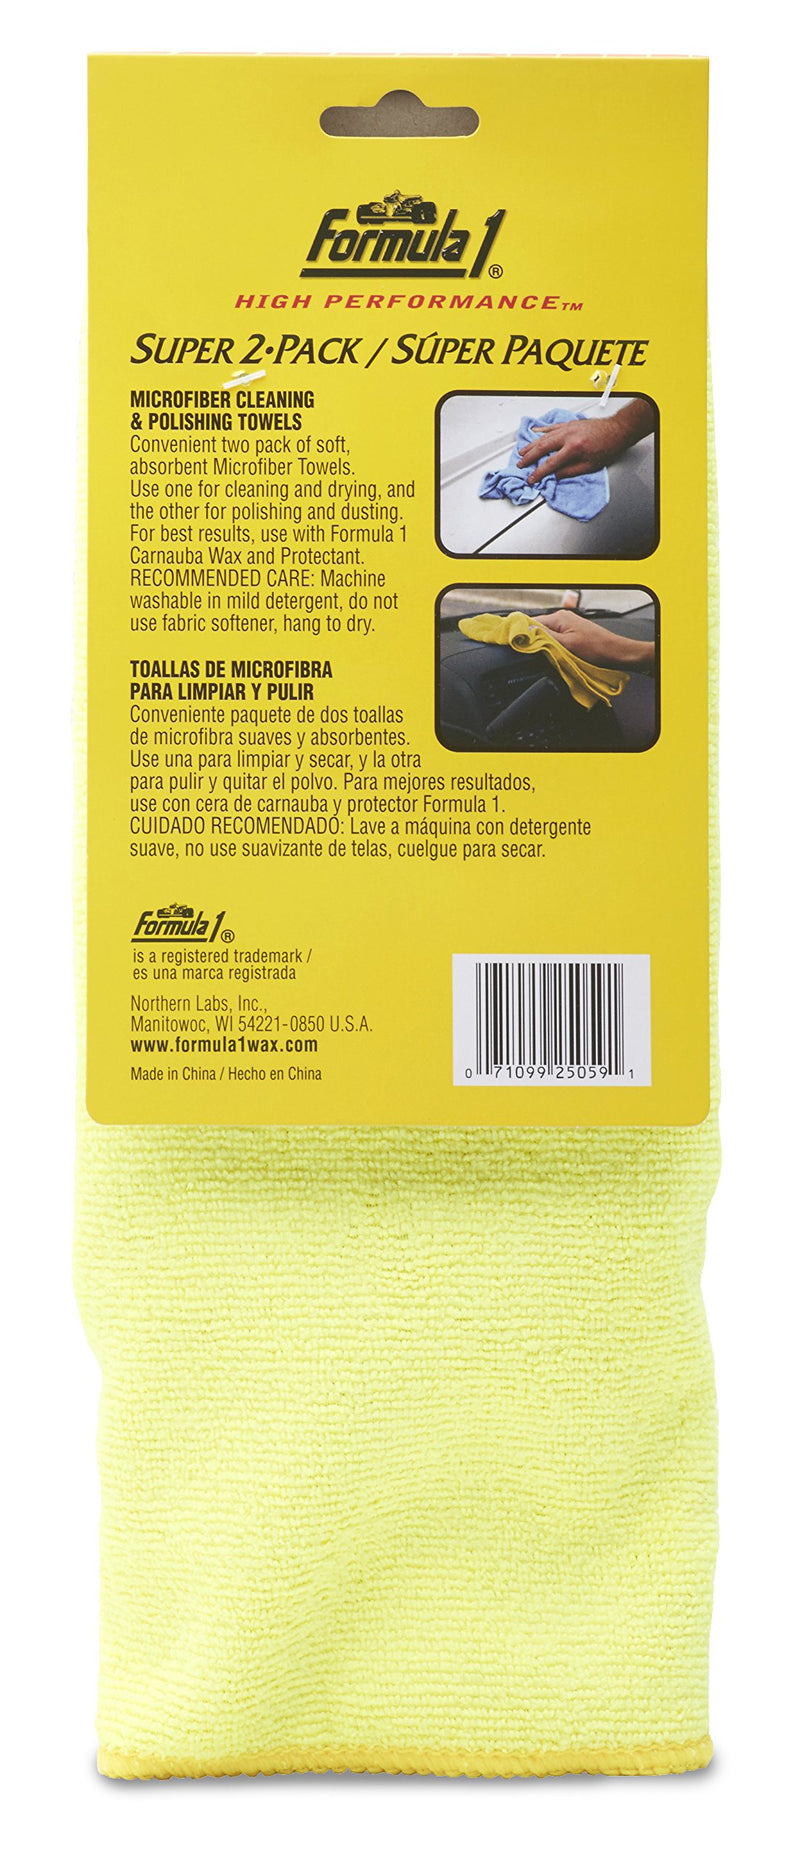  [AUSTRALIA] - Formula 1 Super 2-Pack - Microfiber Cleaning and Polishing Towels - For Wet and Dry Applications - 12" x 16"